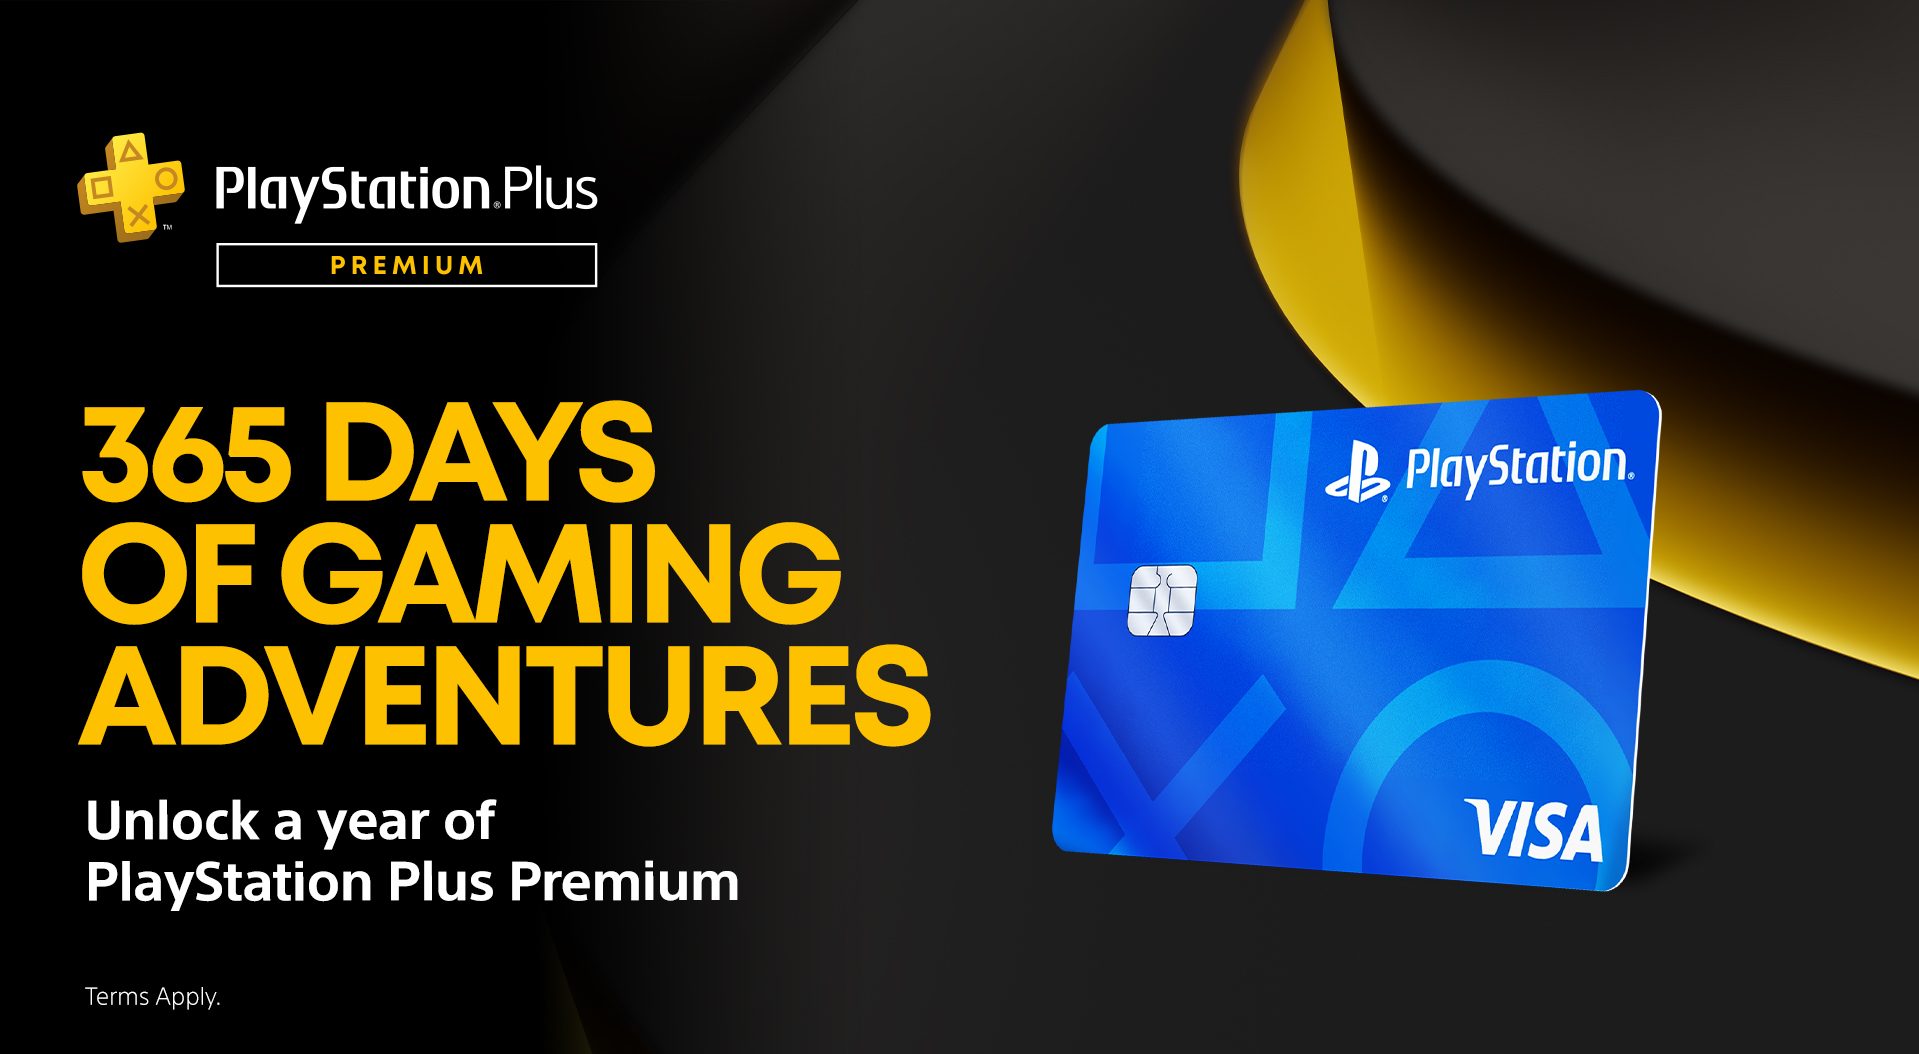 Promotional Image of PlayStation Credit Card. "365 Days of Gaming Adventures" in gold large text. "Unlock a year of PlayStation Premium" underneath in smaller text.